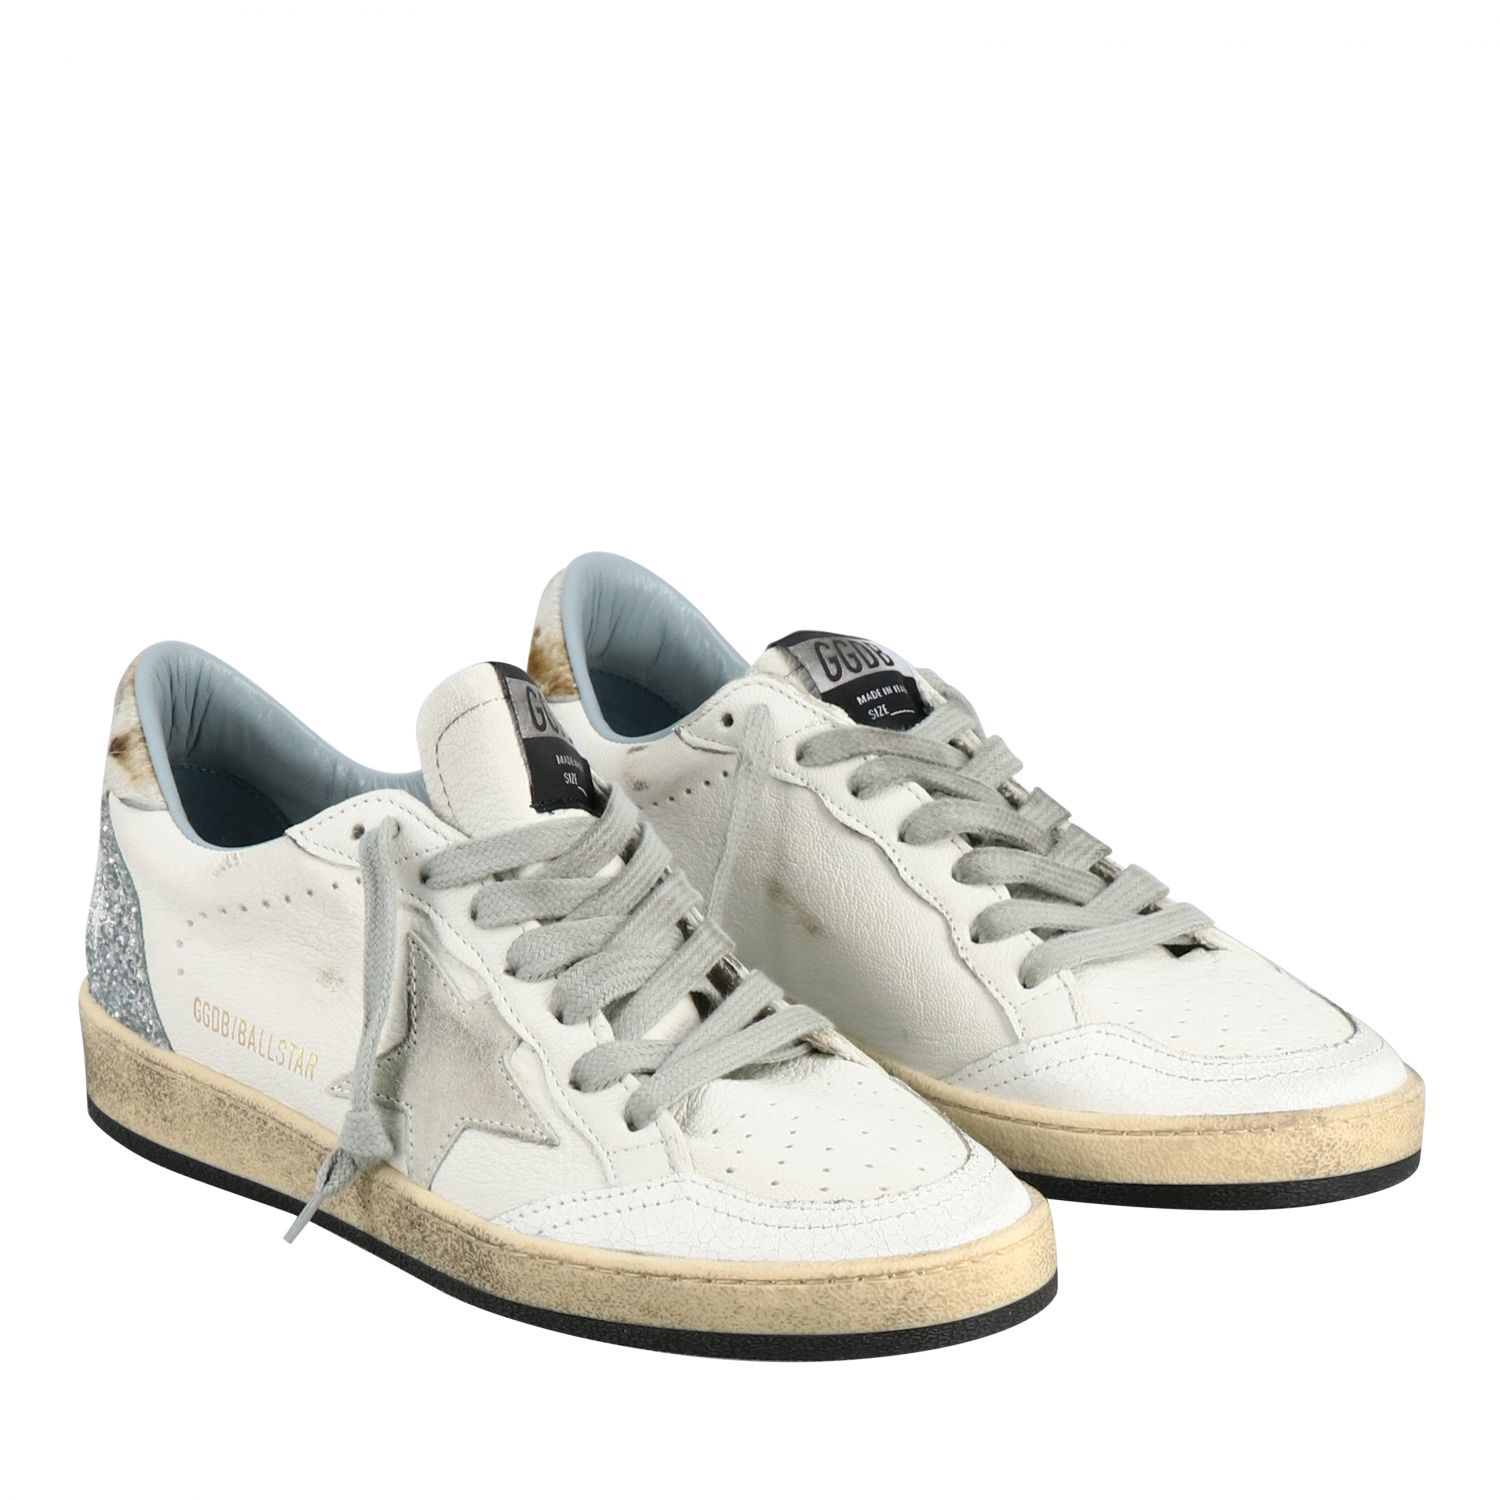 Golden Goose Outlet: Ball star sneakers in leather with suede star | Sneakers Golden Goose Women | Sneakers Golden Goose G32WS592 A43 GIGLIO.COM